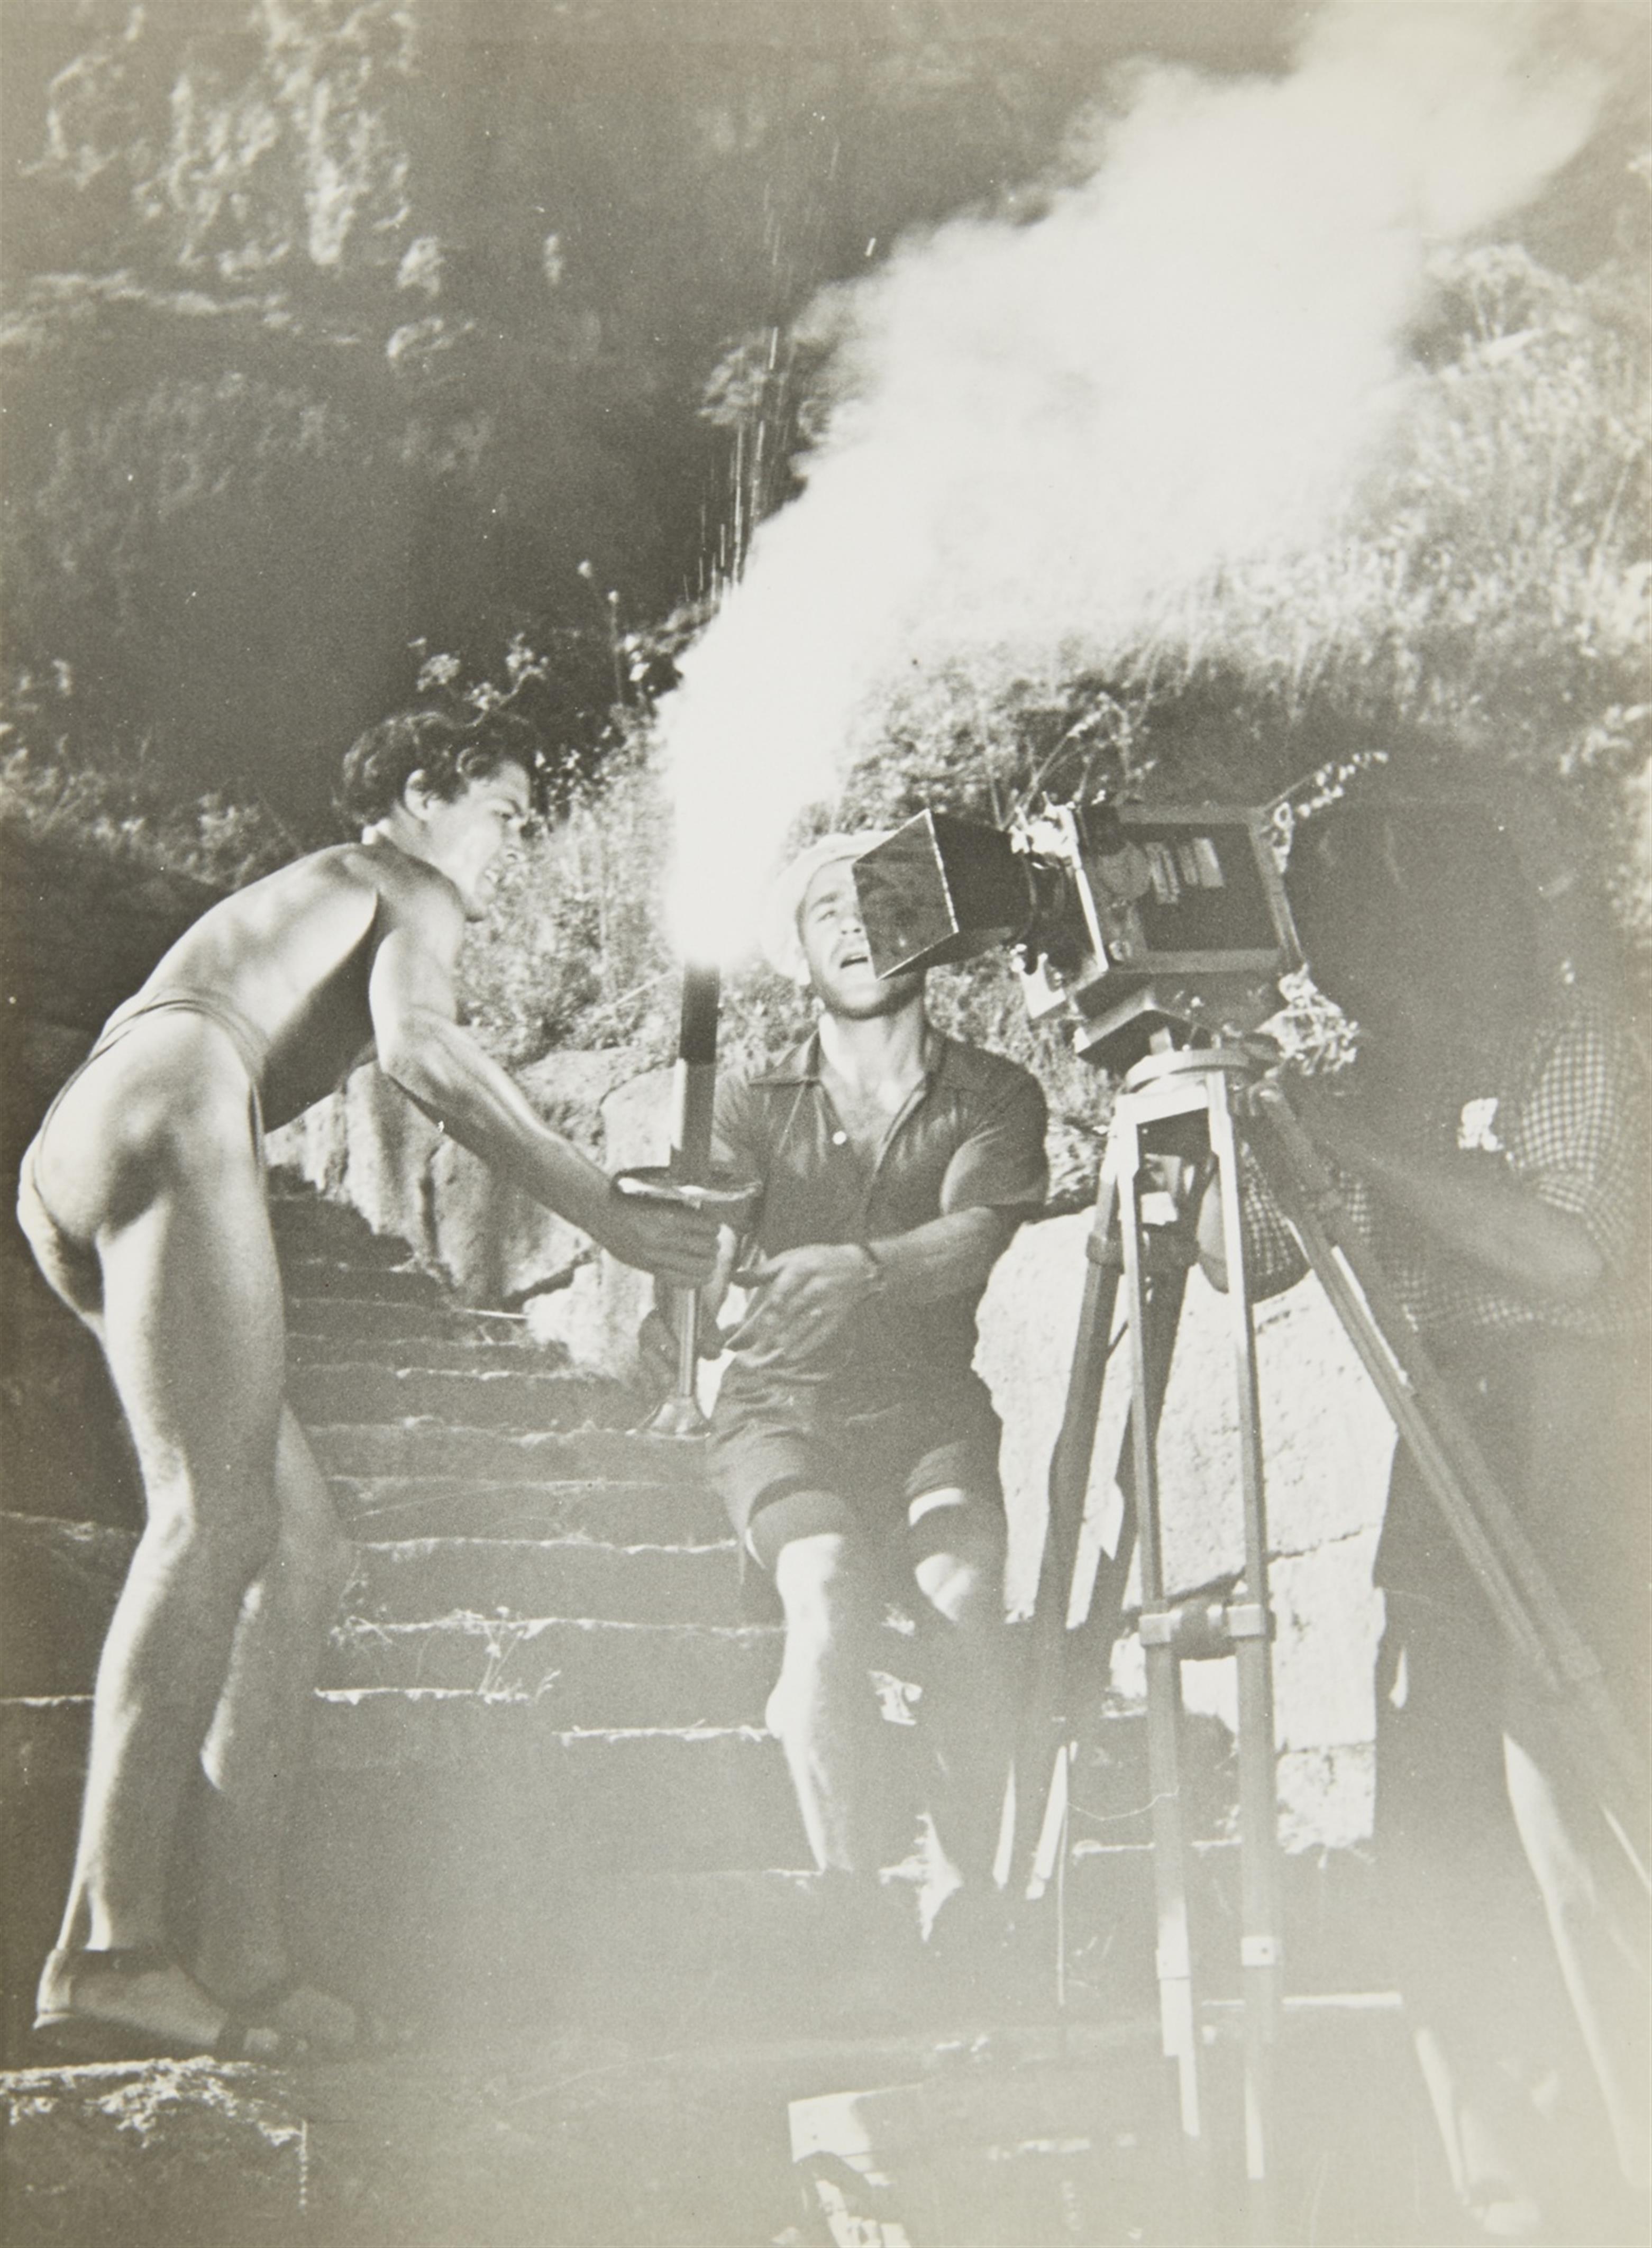 Diverse Photographen - Leni Riefenstahl beim Dreh des "Olympia"-Films (Leni Riefenstahl during the filming of "Olympia") - image-7